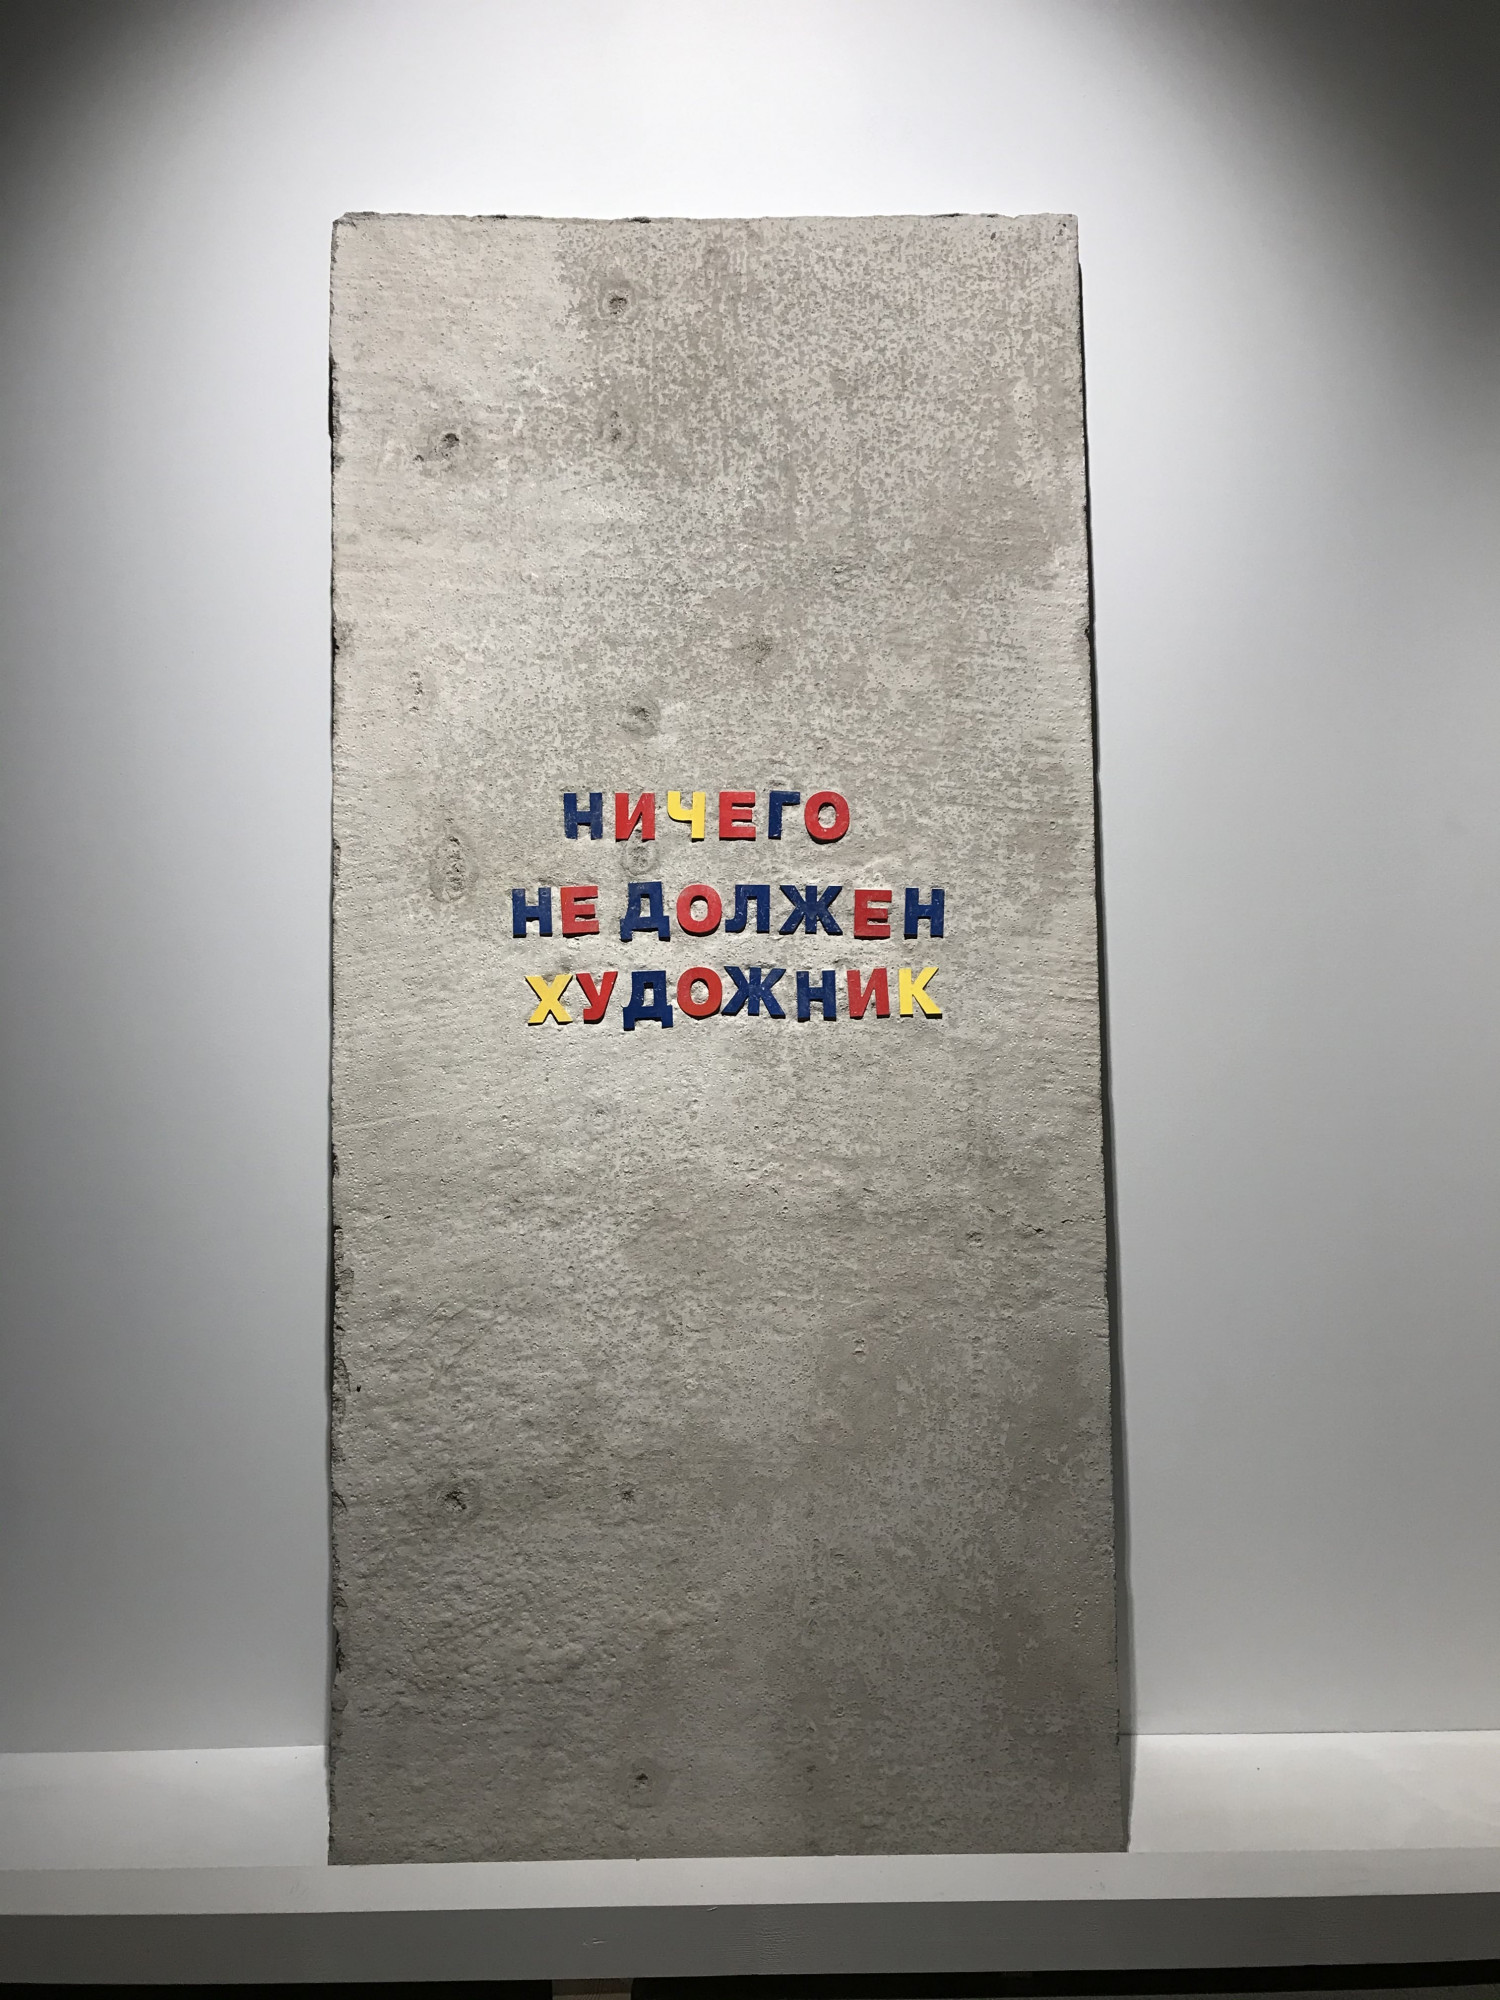 Freedom to Be an Artist, 2020, Nemoskva exhibition. “The artist does not owe you anything”